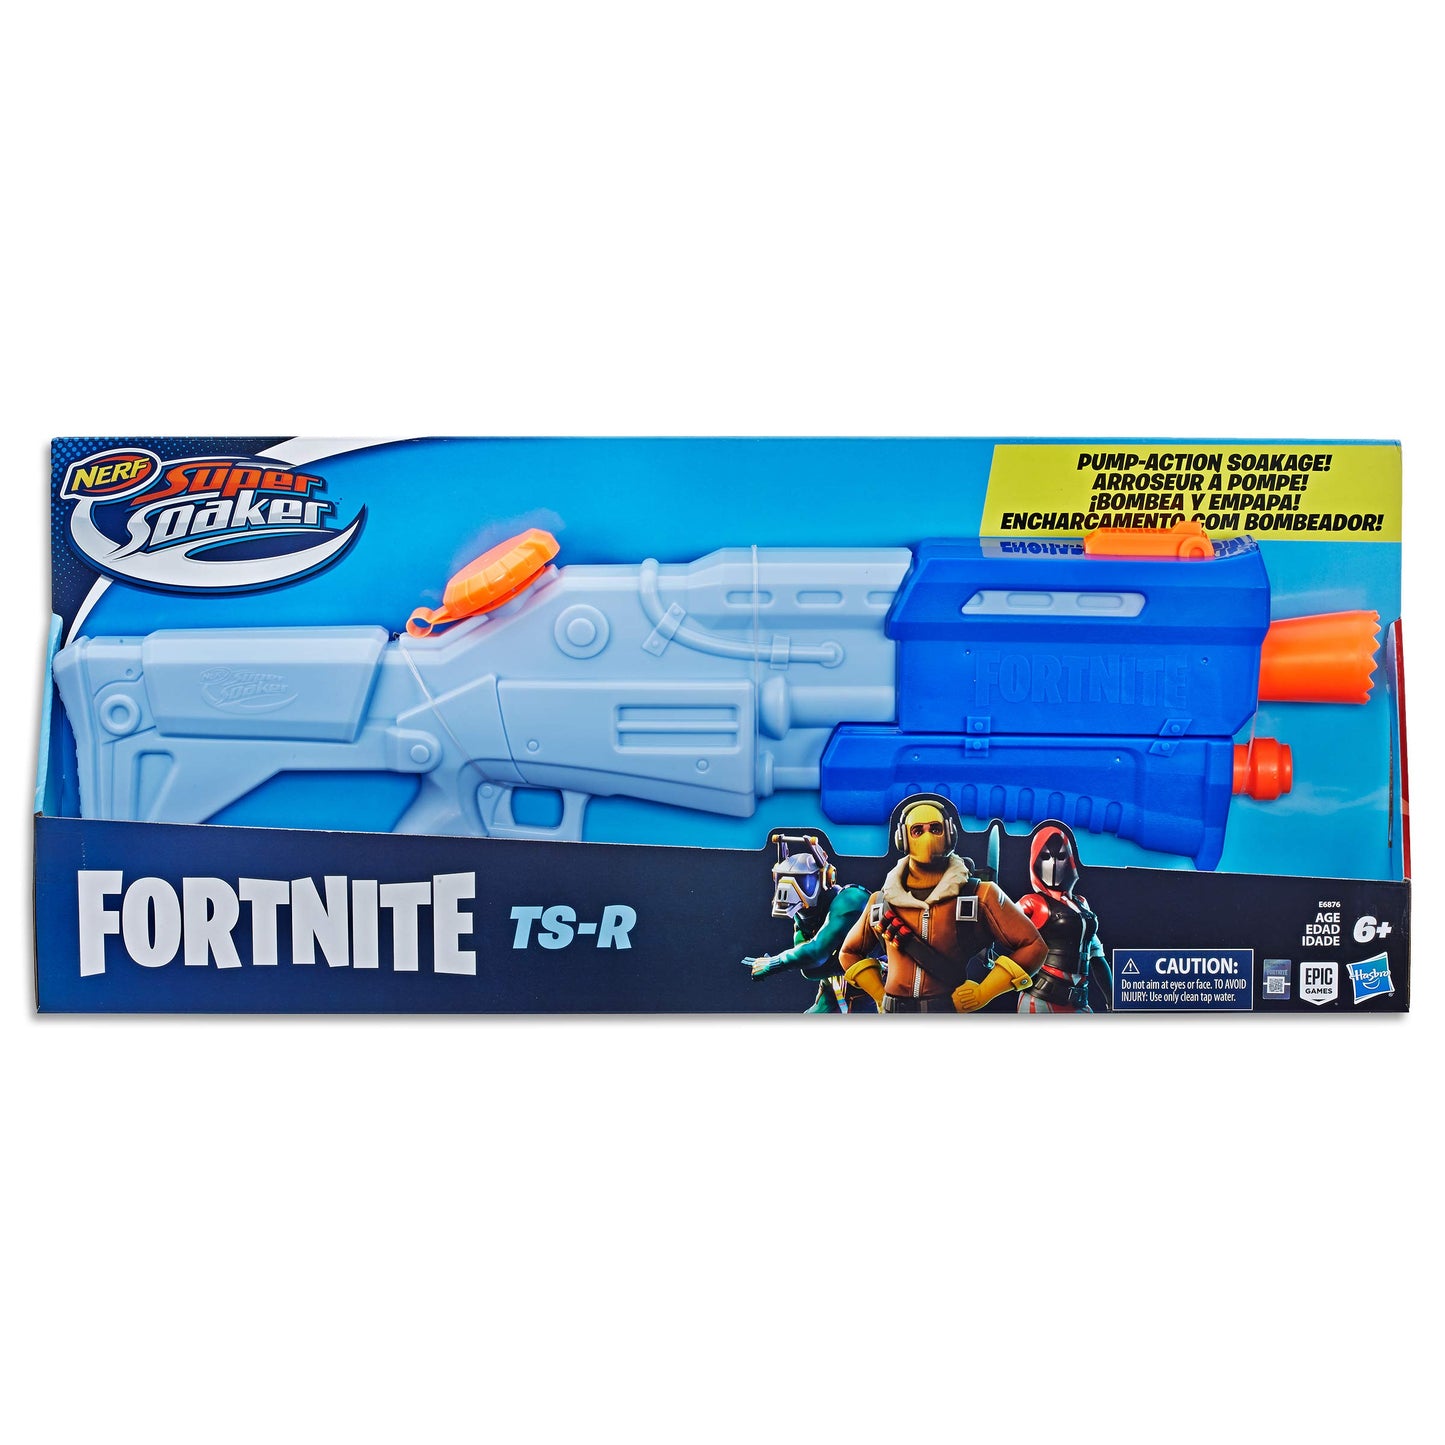 Fortnite TS-R Nerf Super Soaker Water Blaster Toy -- Pump Action -- 36 Fluid Ounce Capacity -- for Kids, Teens, Adults